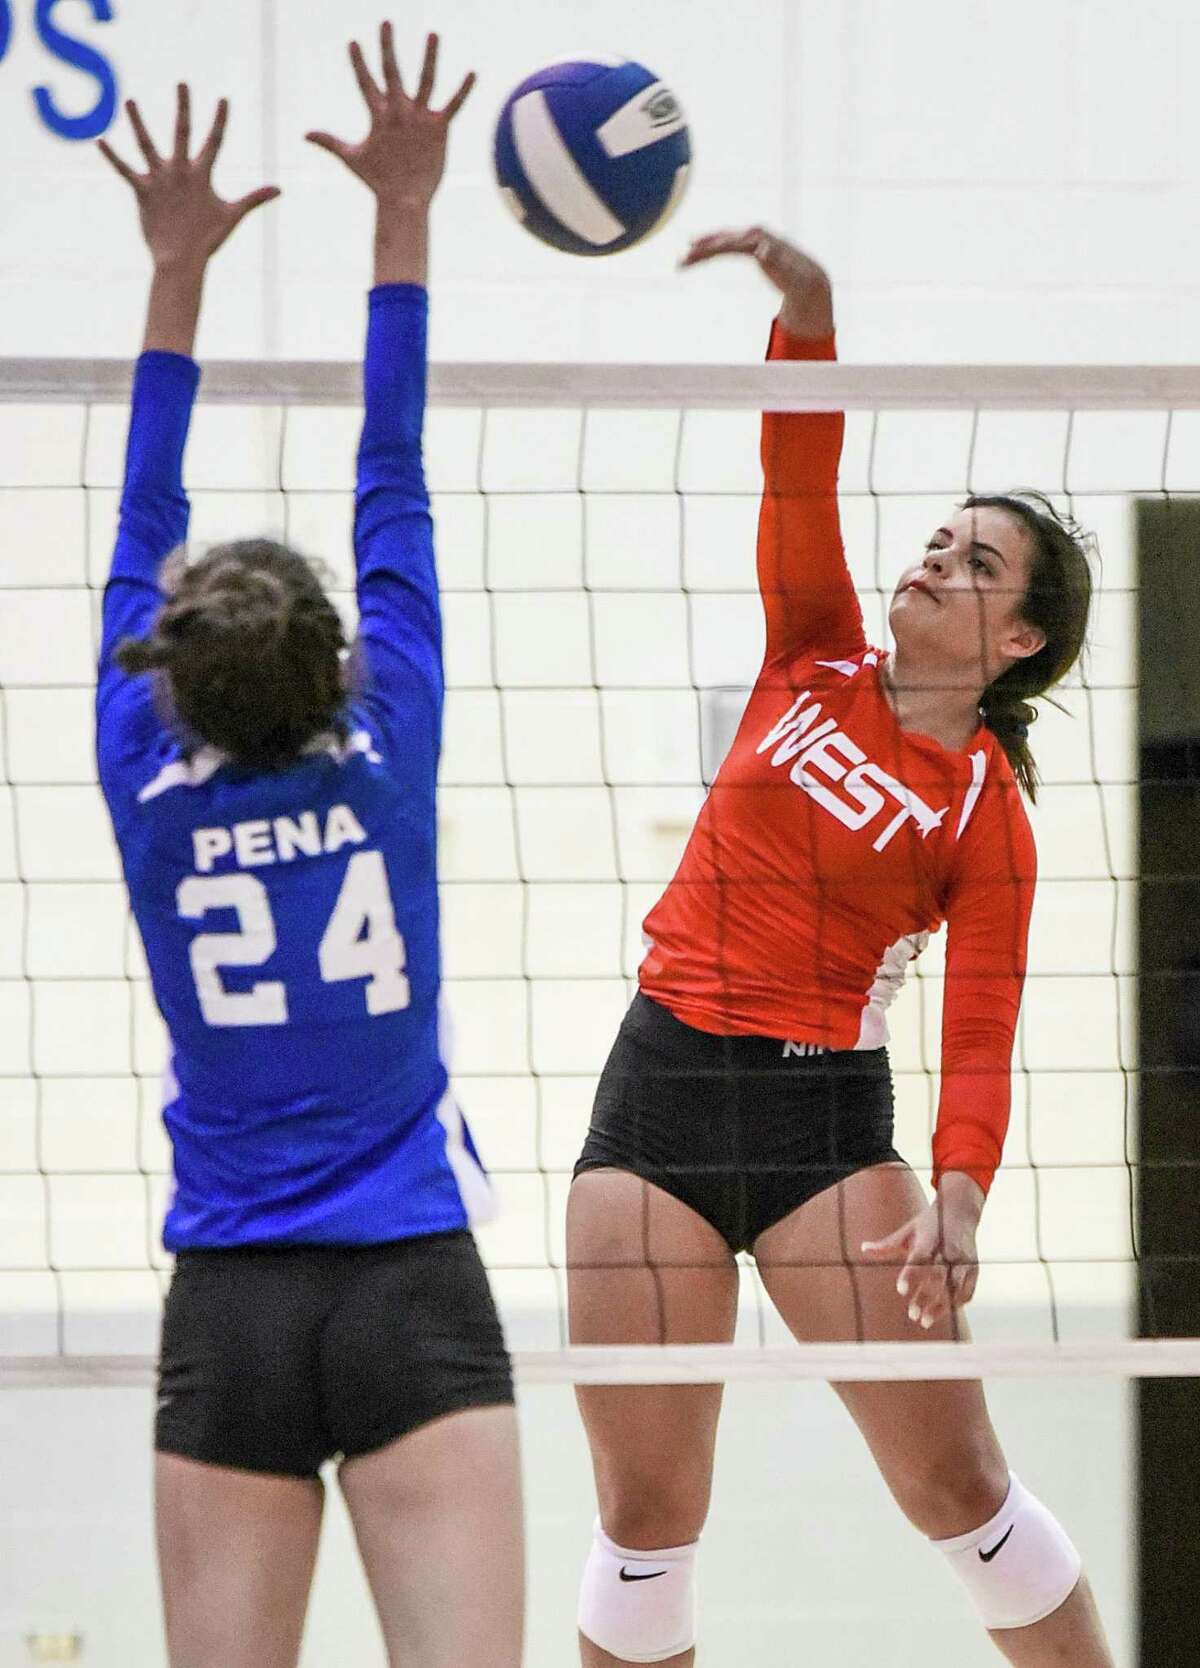 Gabriela Canavati goes for a kill against Jennifer Pena during the Bosom Buddies All-Star game at St. Augustine.